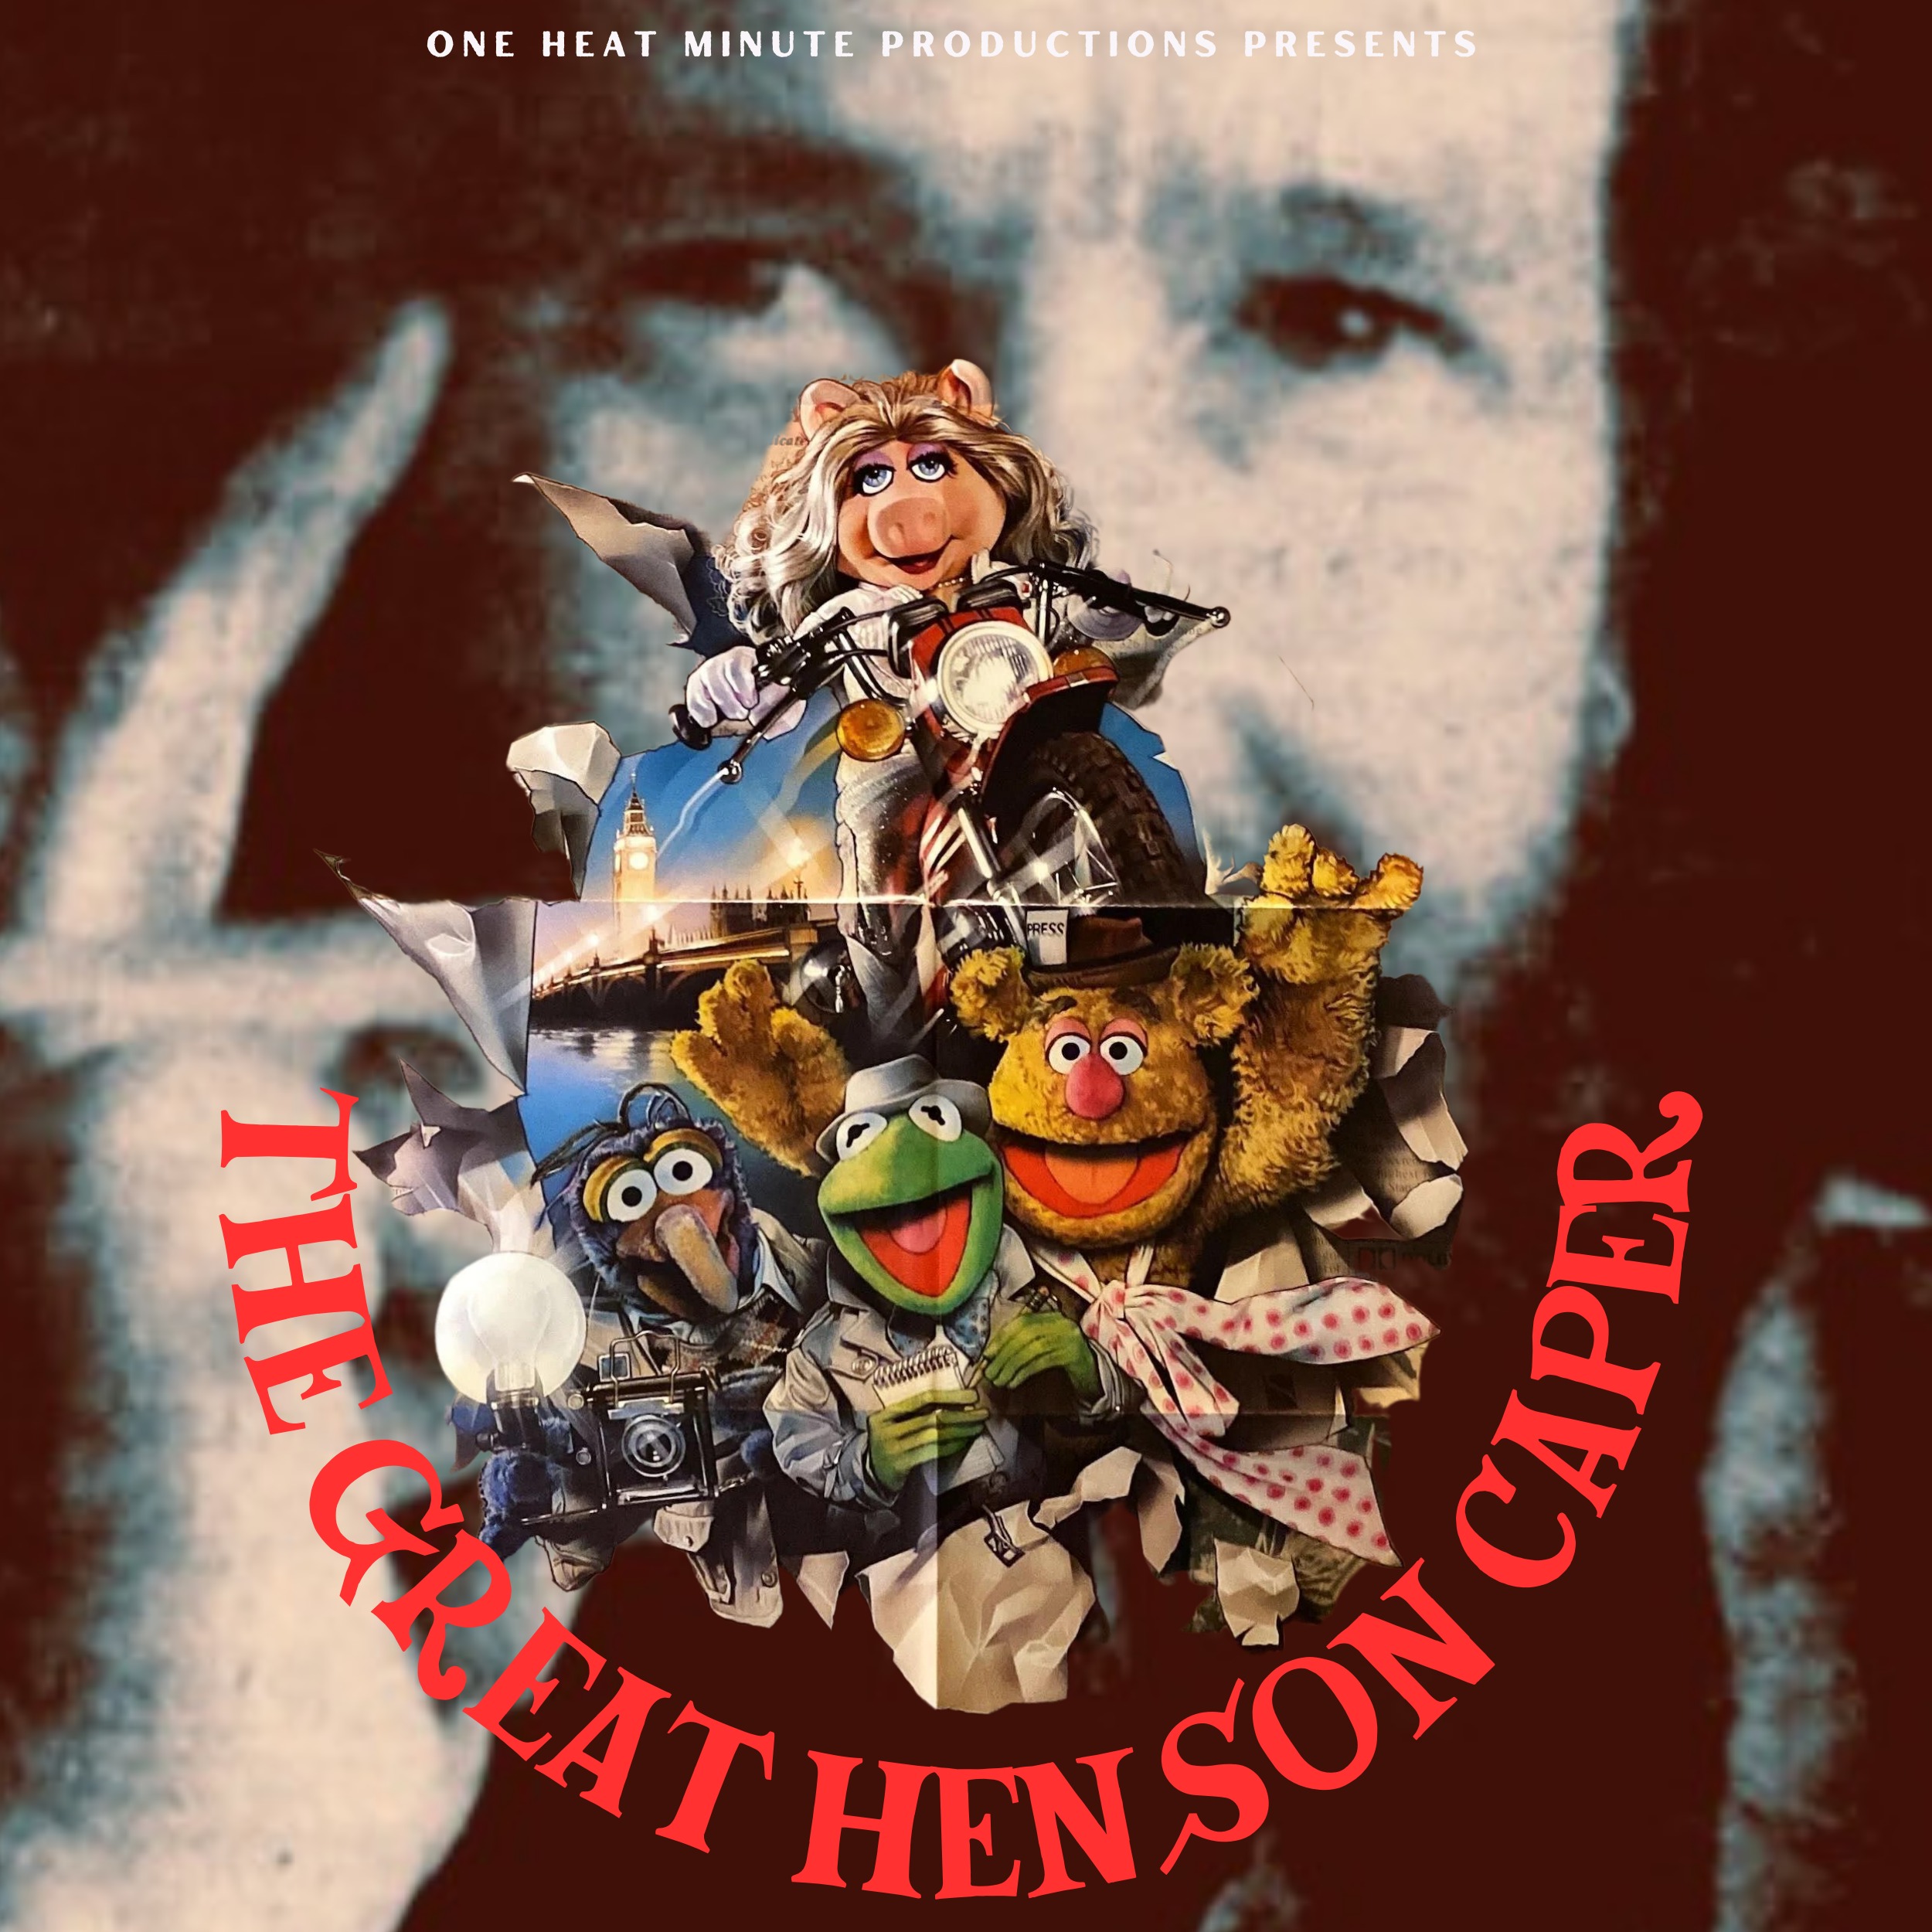 THE GREAT HENSON CAPER PART 5: THE GREAT MUPPET CAPER